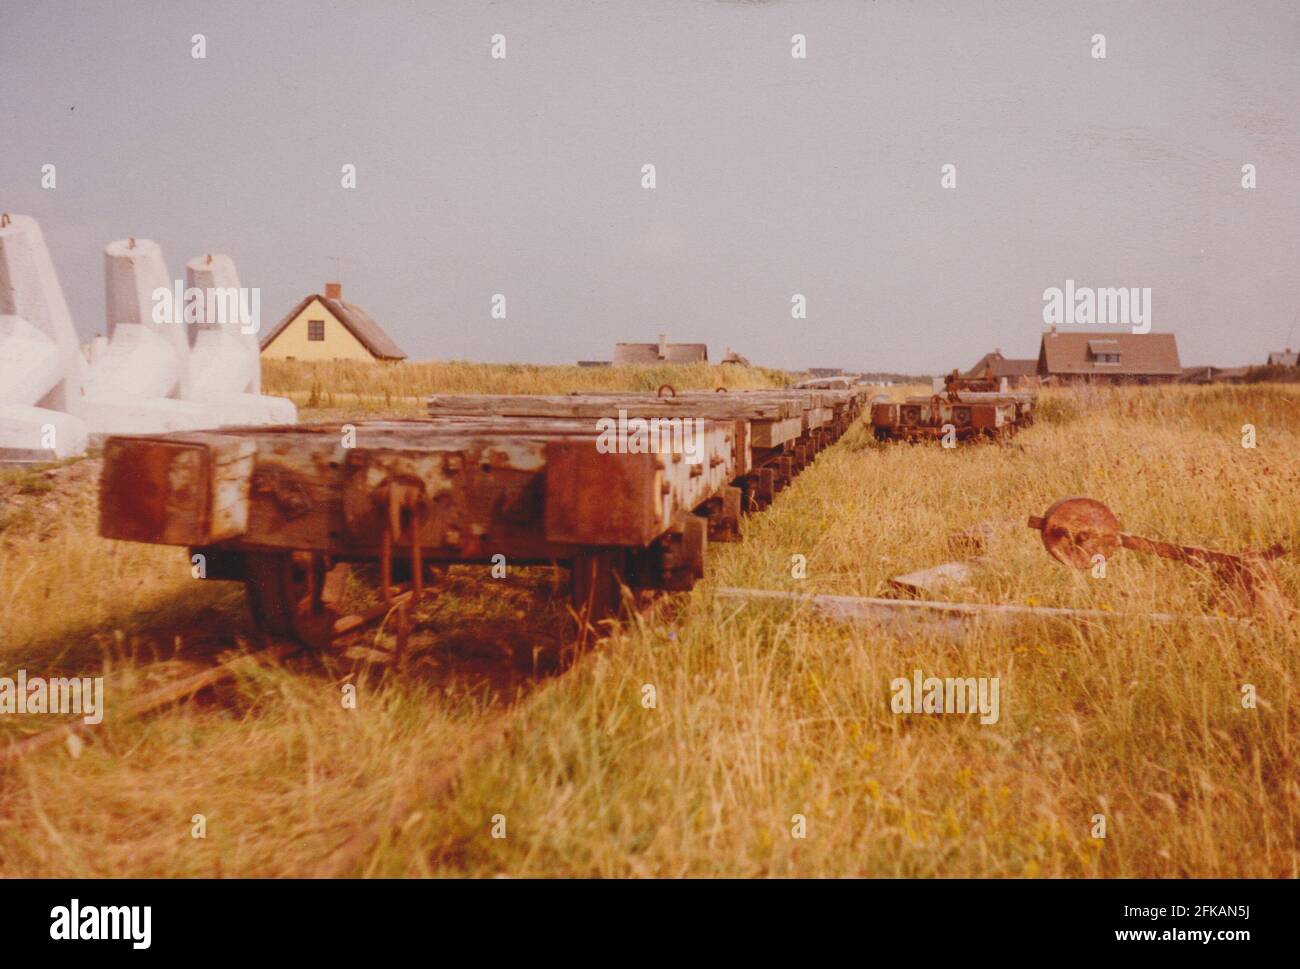 Agger, Denmark - 1983: The workshops of the coasst maintenance 'Vandbygningsv�senet' with the now removed narrow gauge railway tracks (785mm). Rail carriages arranged for scrapping. Stock Photo